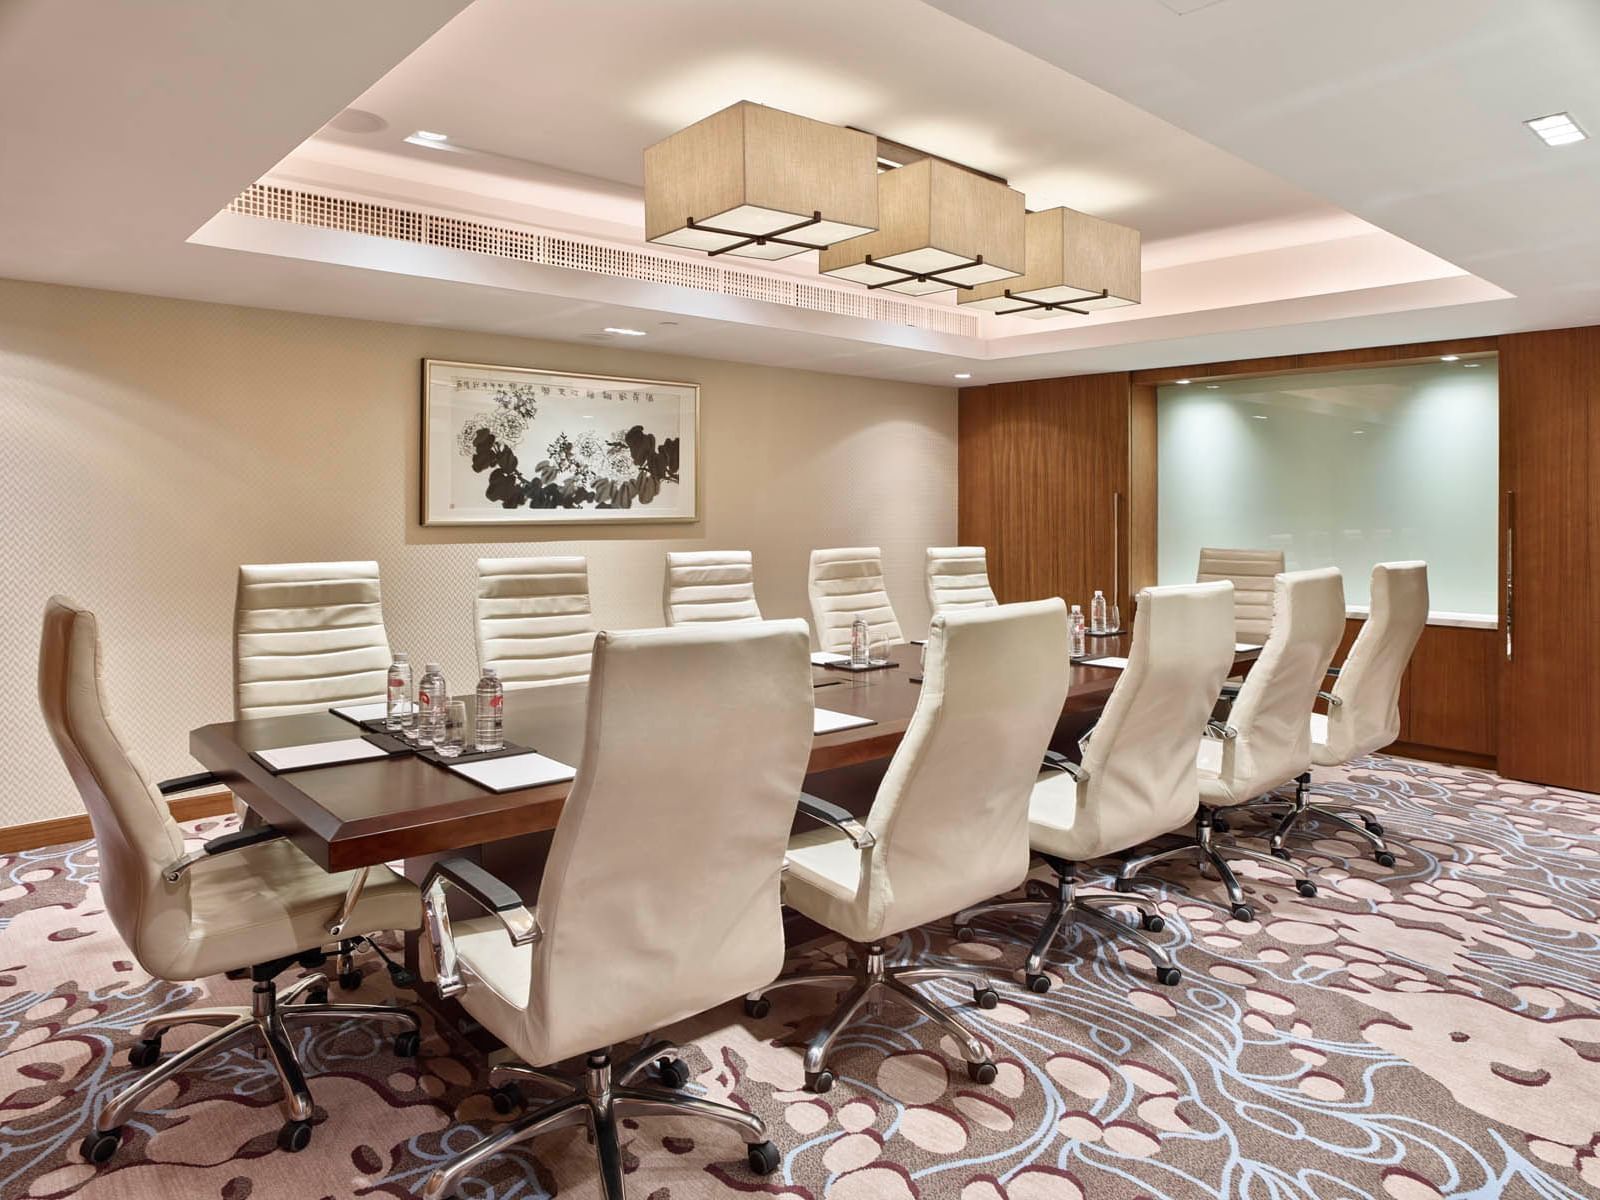 Interior of Board Meeting Room at White Swan hotel